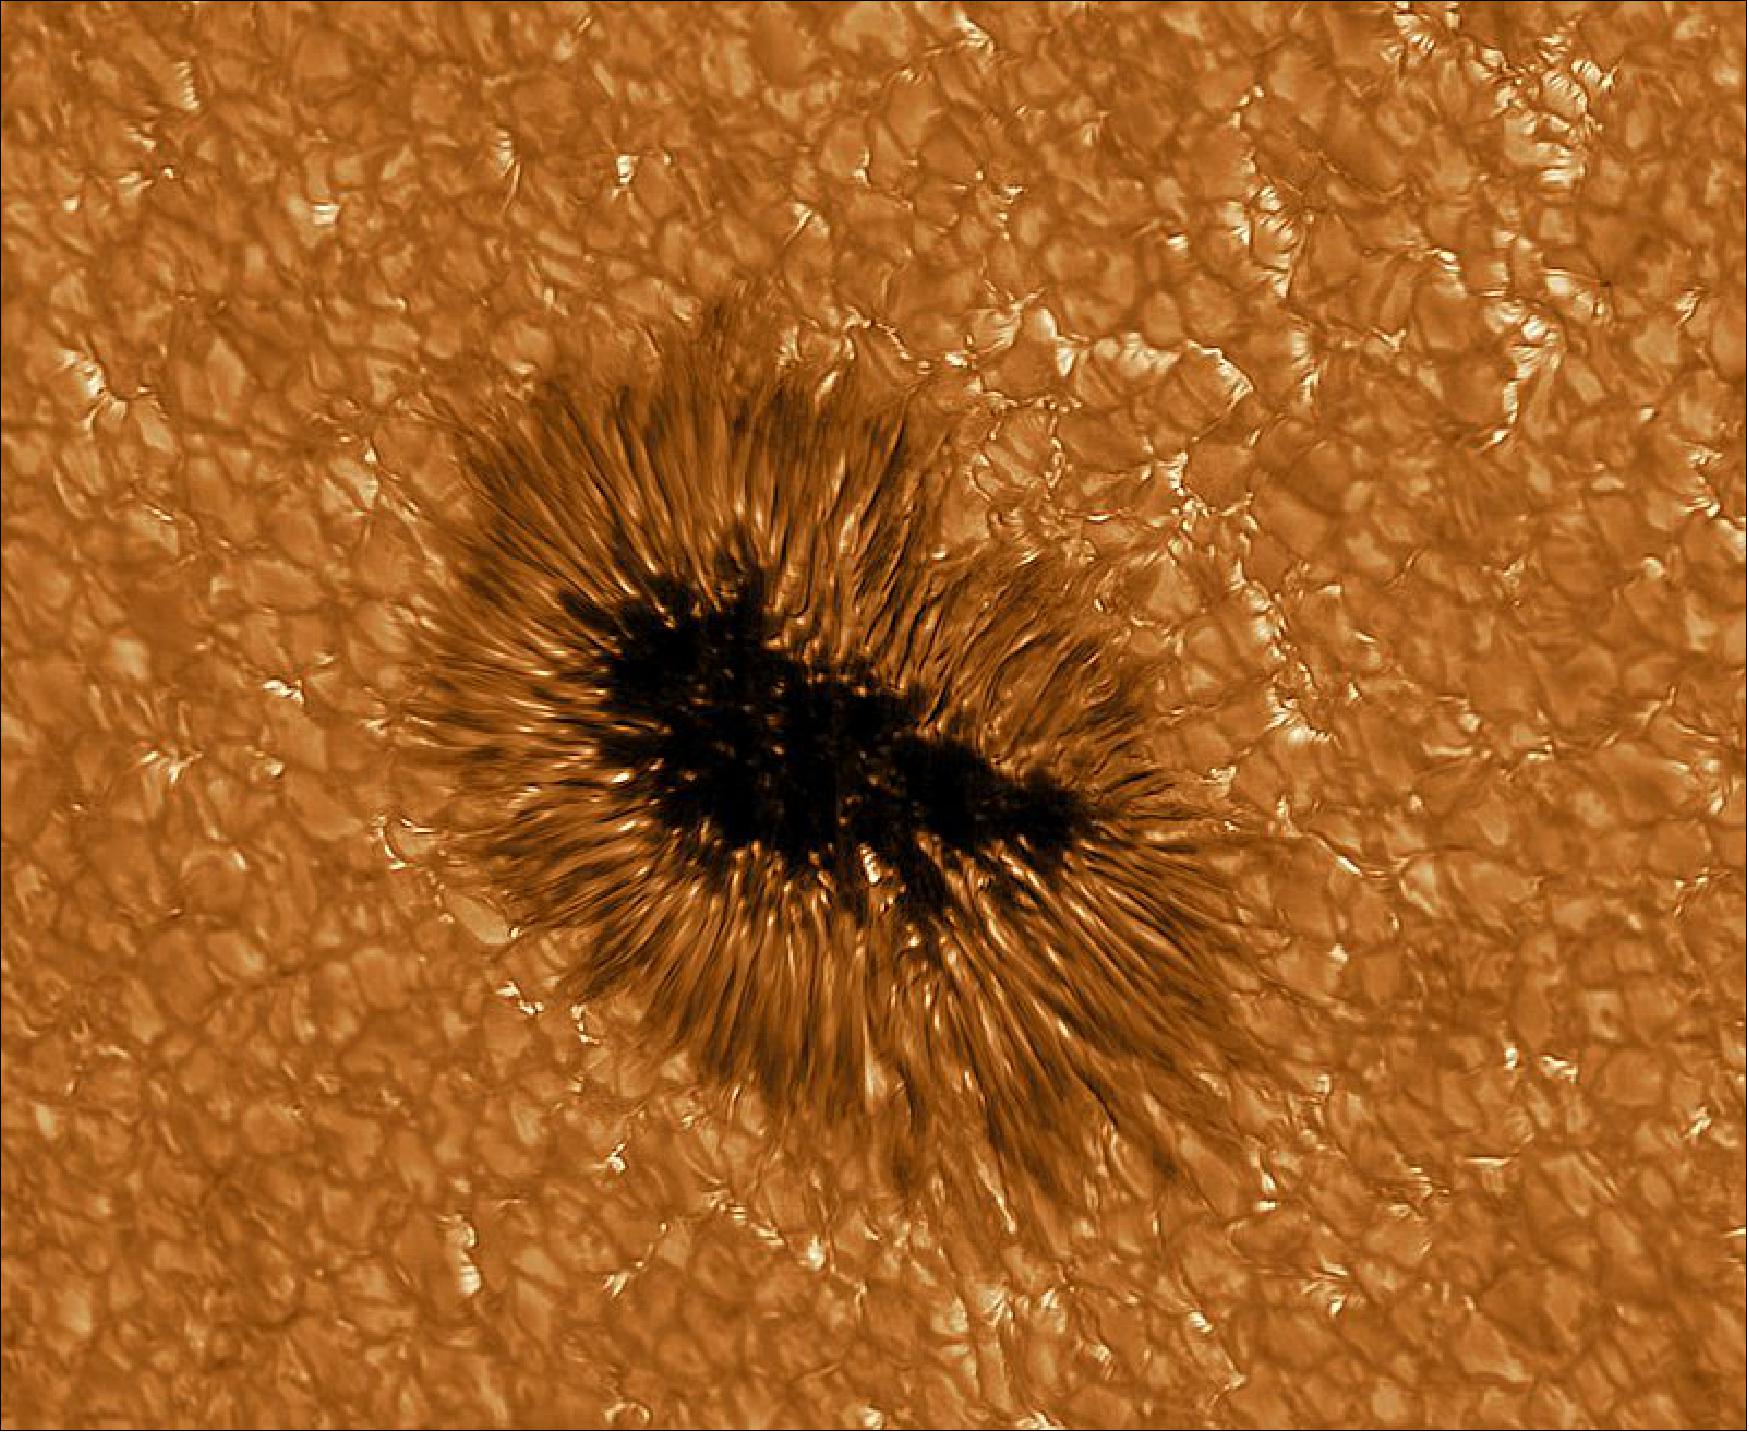 Figure 5: A sunspot observed in high resolution by the GREGOR telescope at the wavelength 430 nm (image credit: KIS)